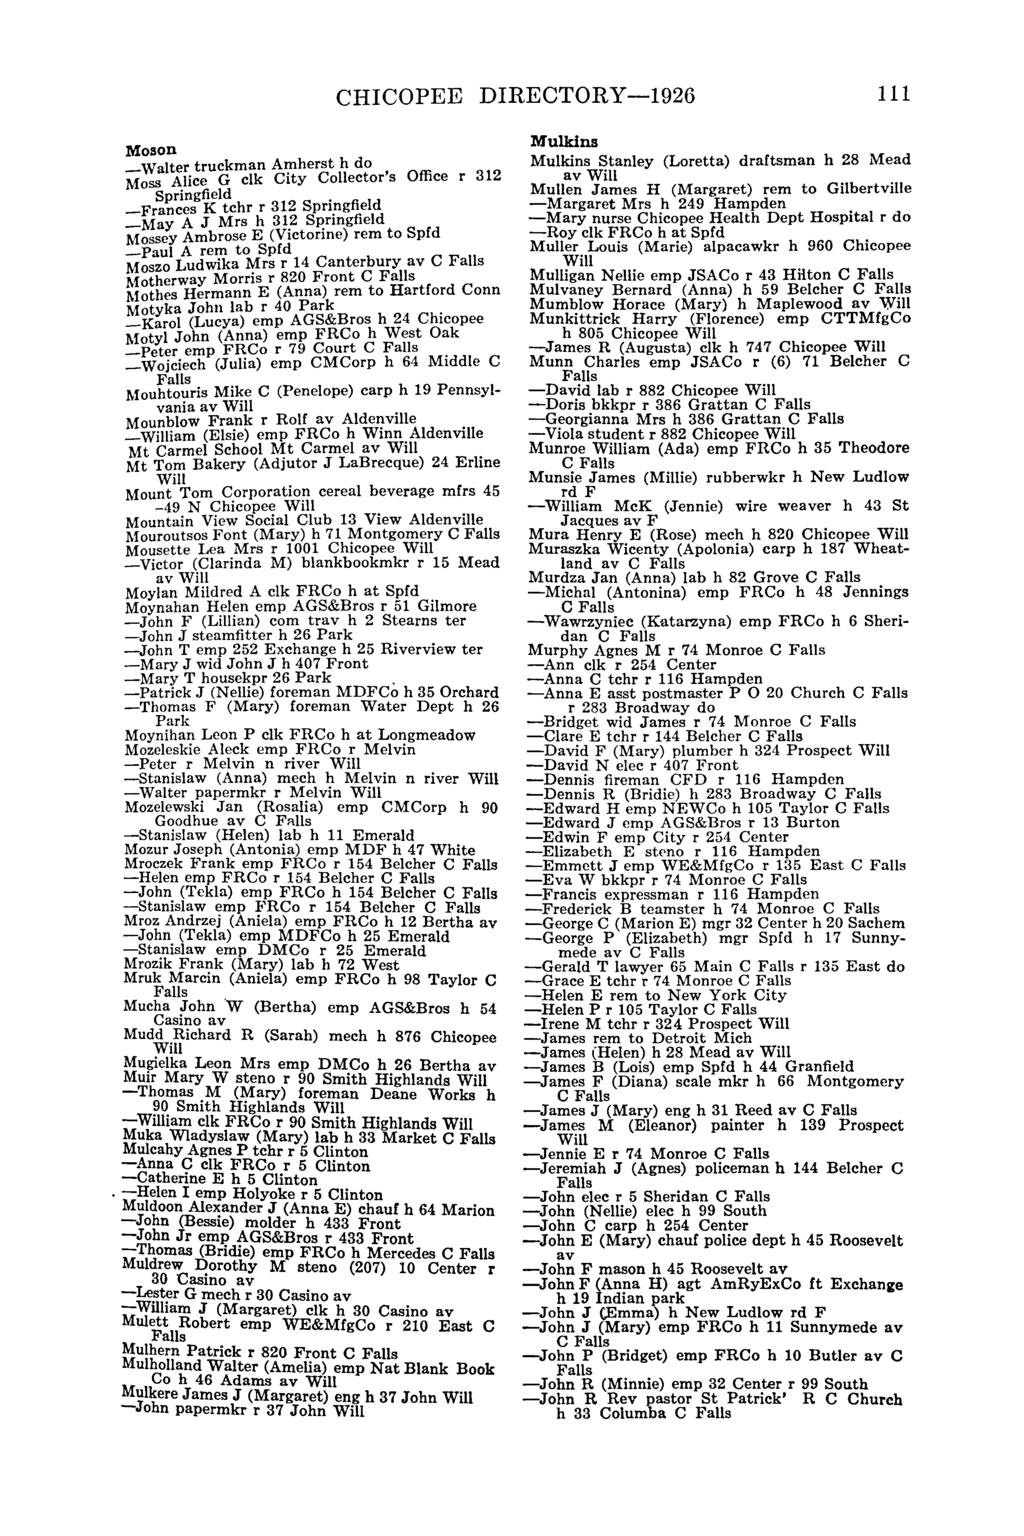 CHICOPEE DIRECTORY-1926 111 Moson _Walter truckman At;nherst h do, Moss Alice G elk City Collector s Office r 312 Springfield. -Frances K tchr r 312 Sprl?